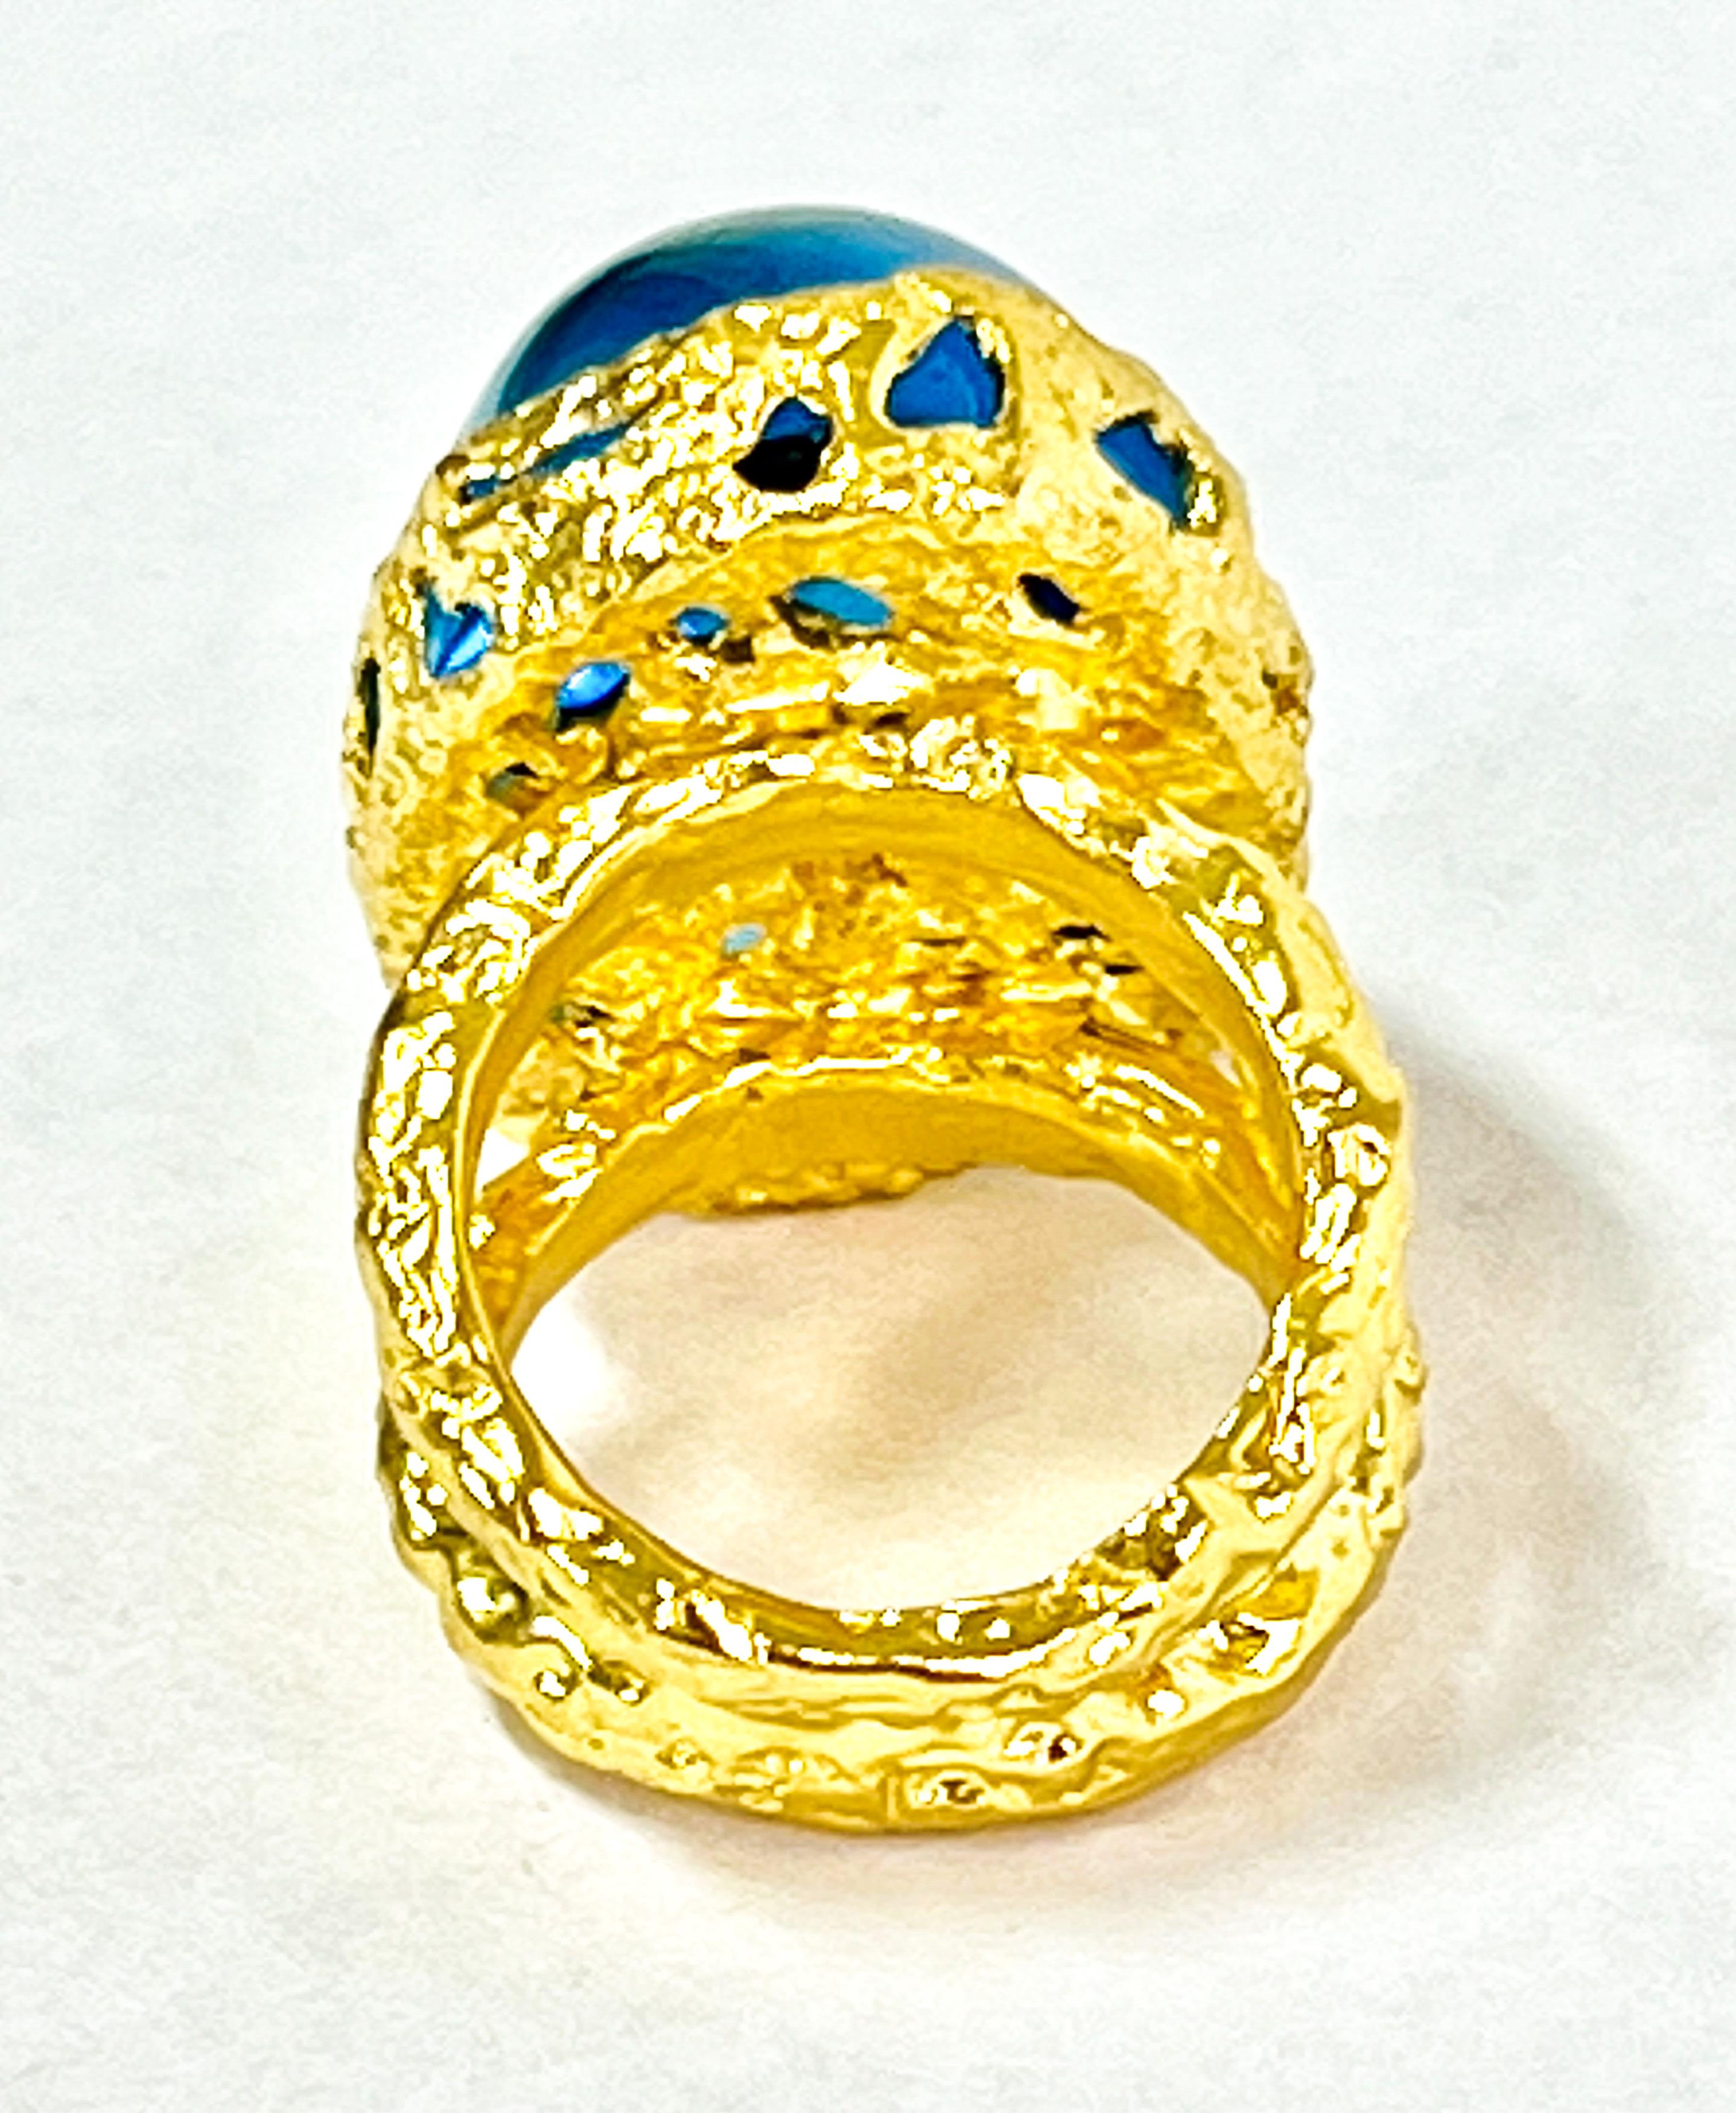 Blue Topaz Cocktail Ring in 22k Gold, by Tagili 4